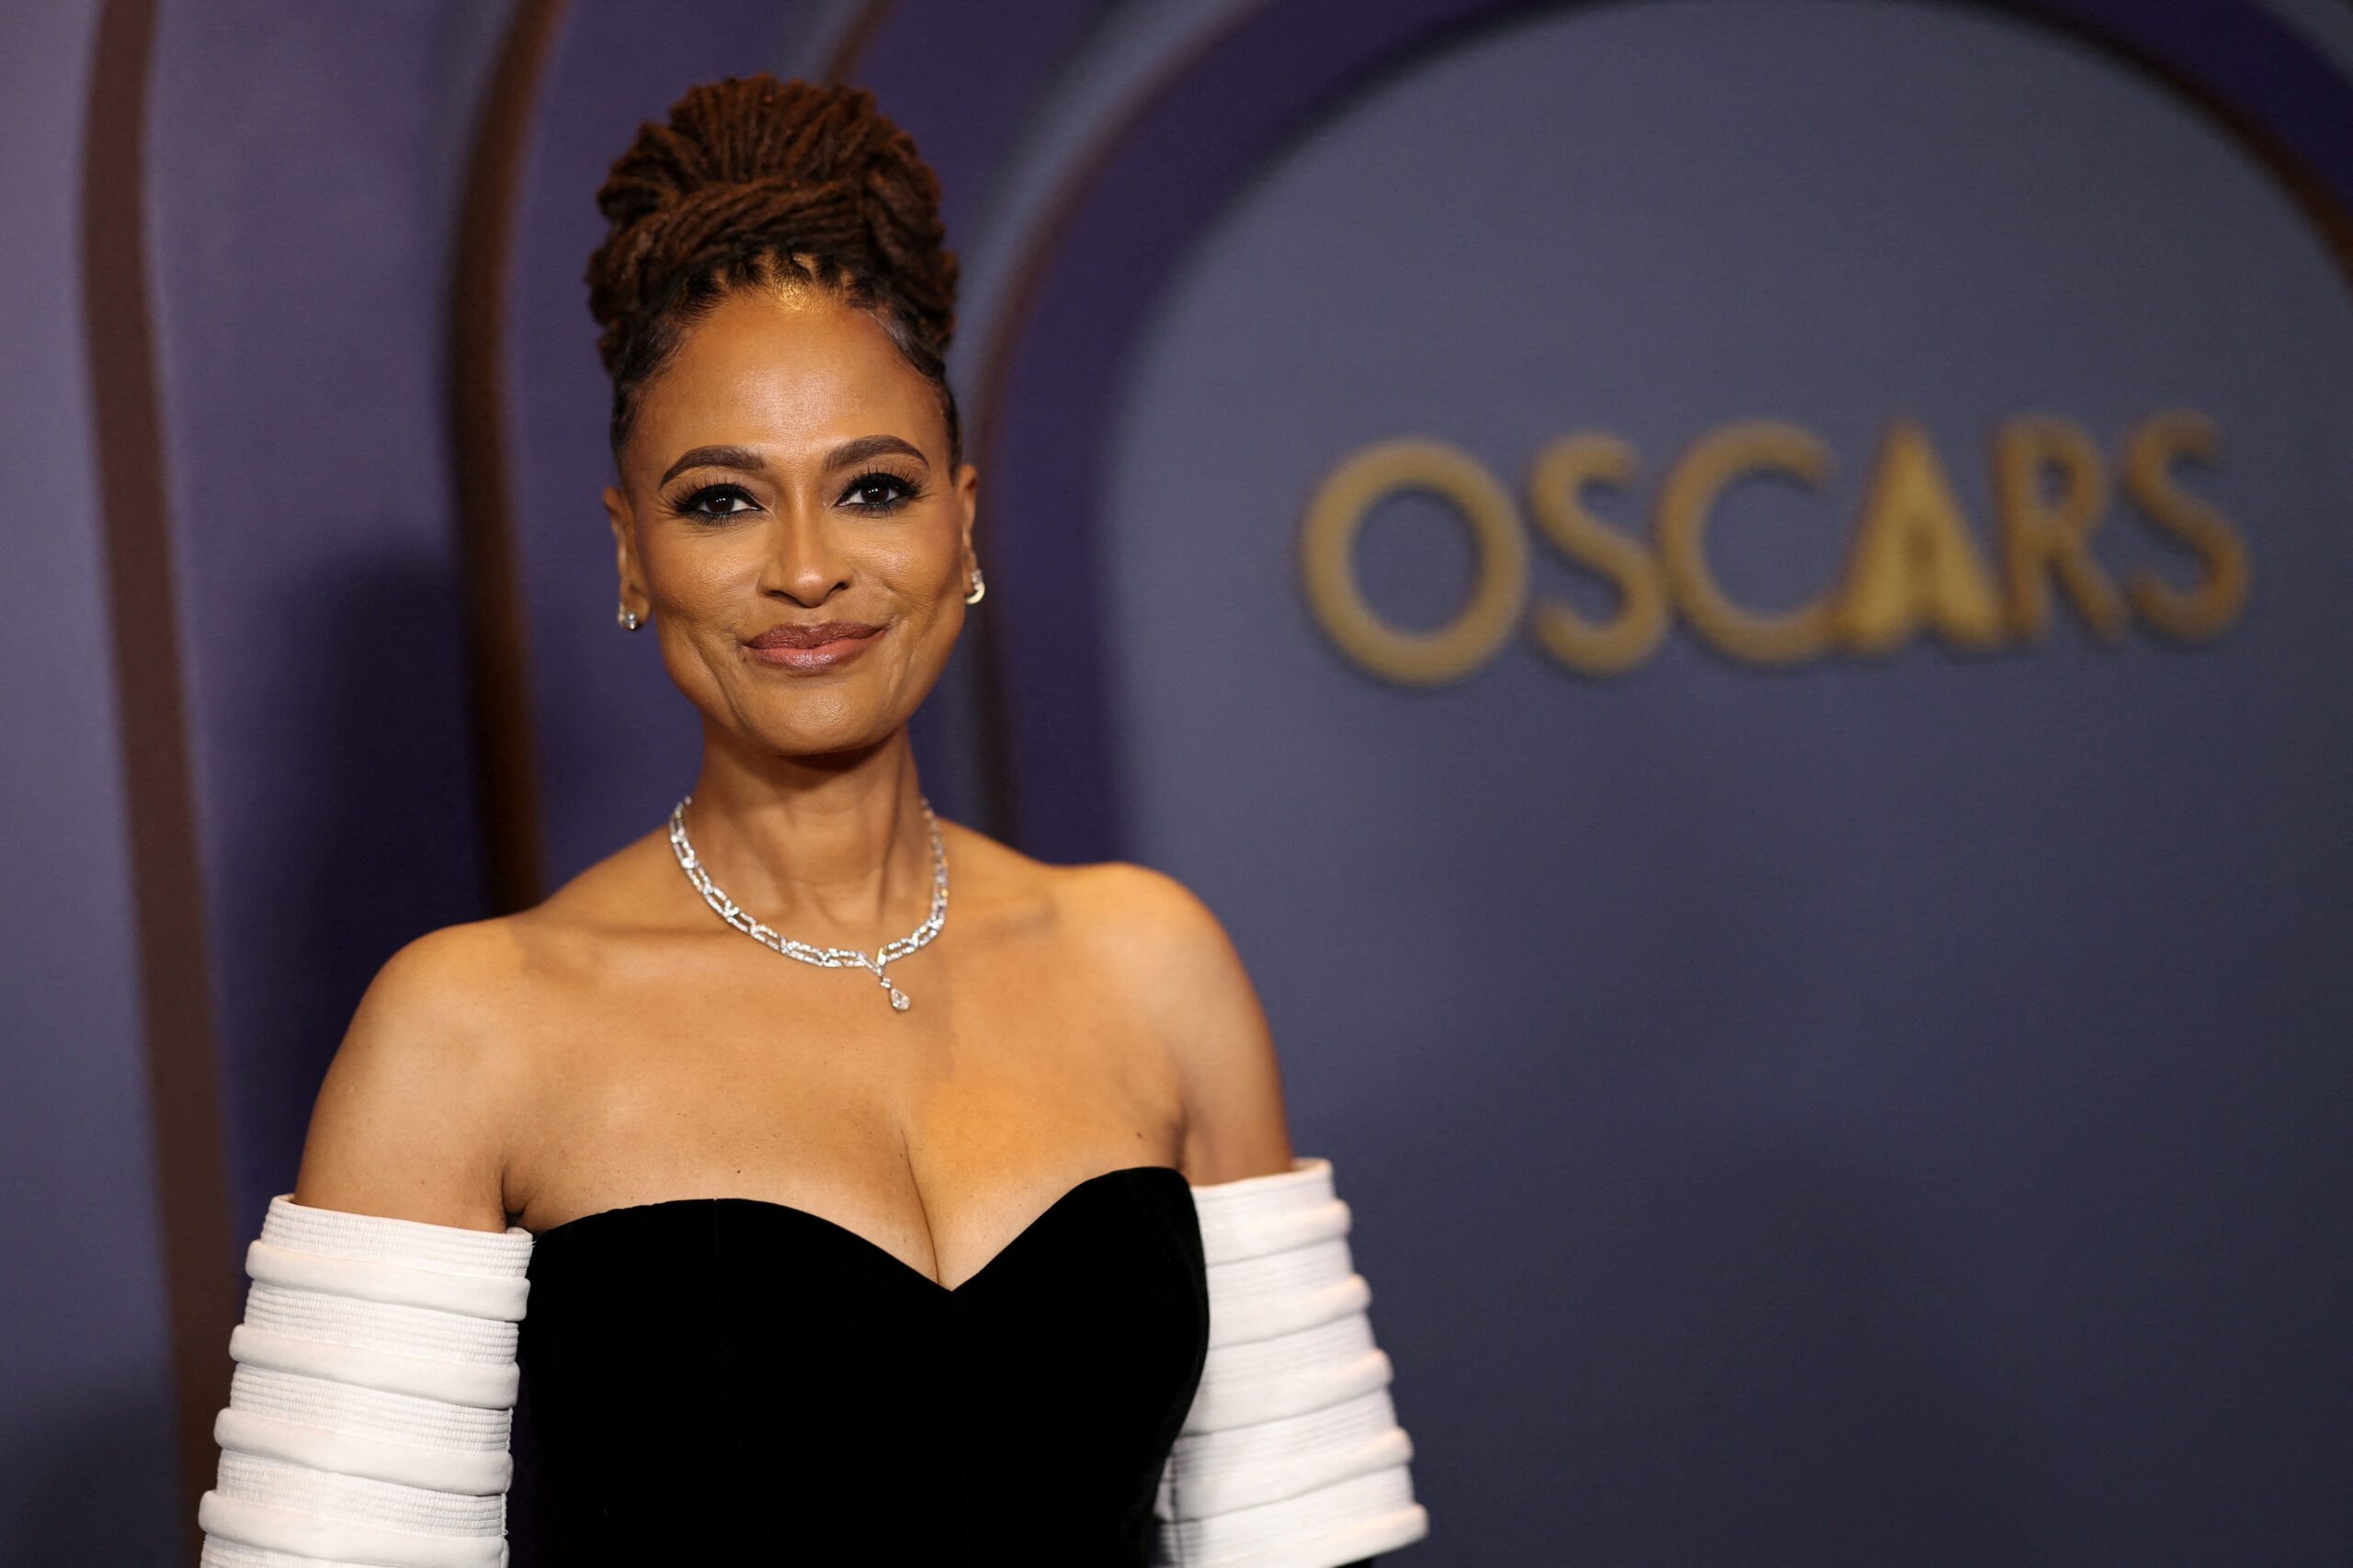 Ava DuVernay wants biopic ‘Origin’ to create more conversation about caste